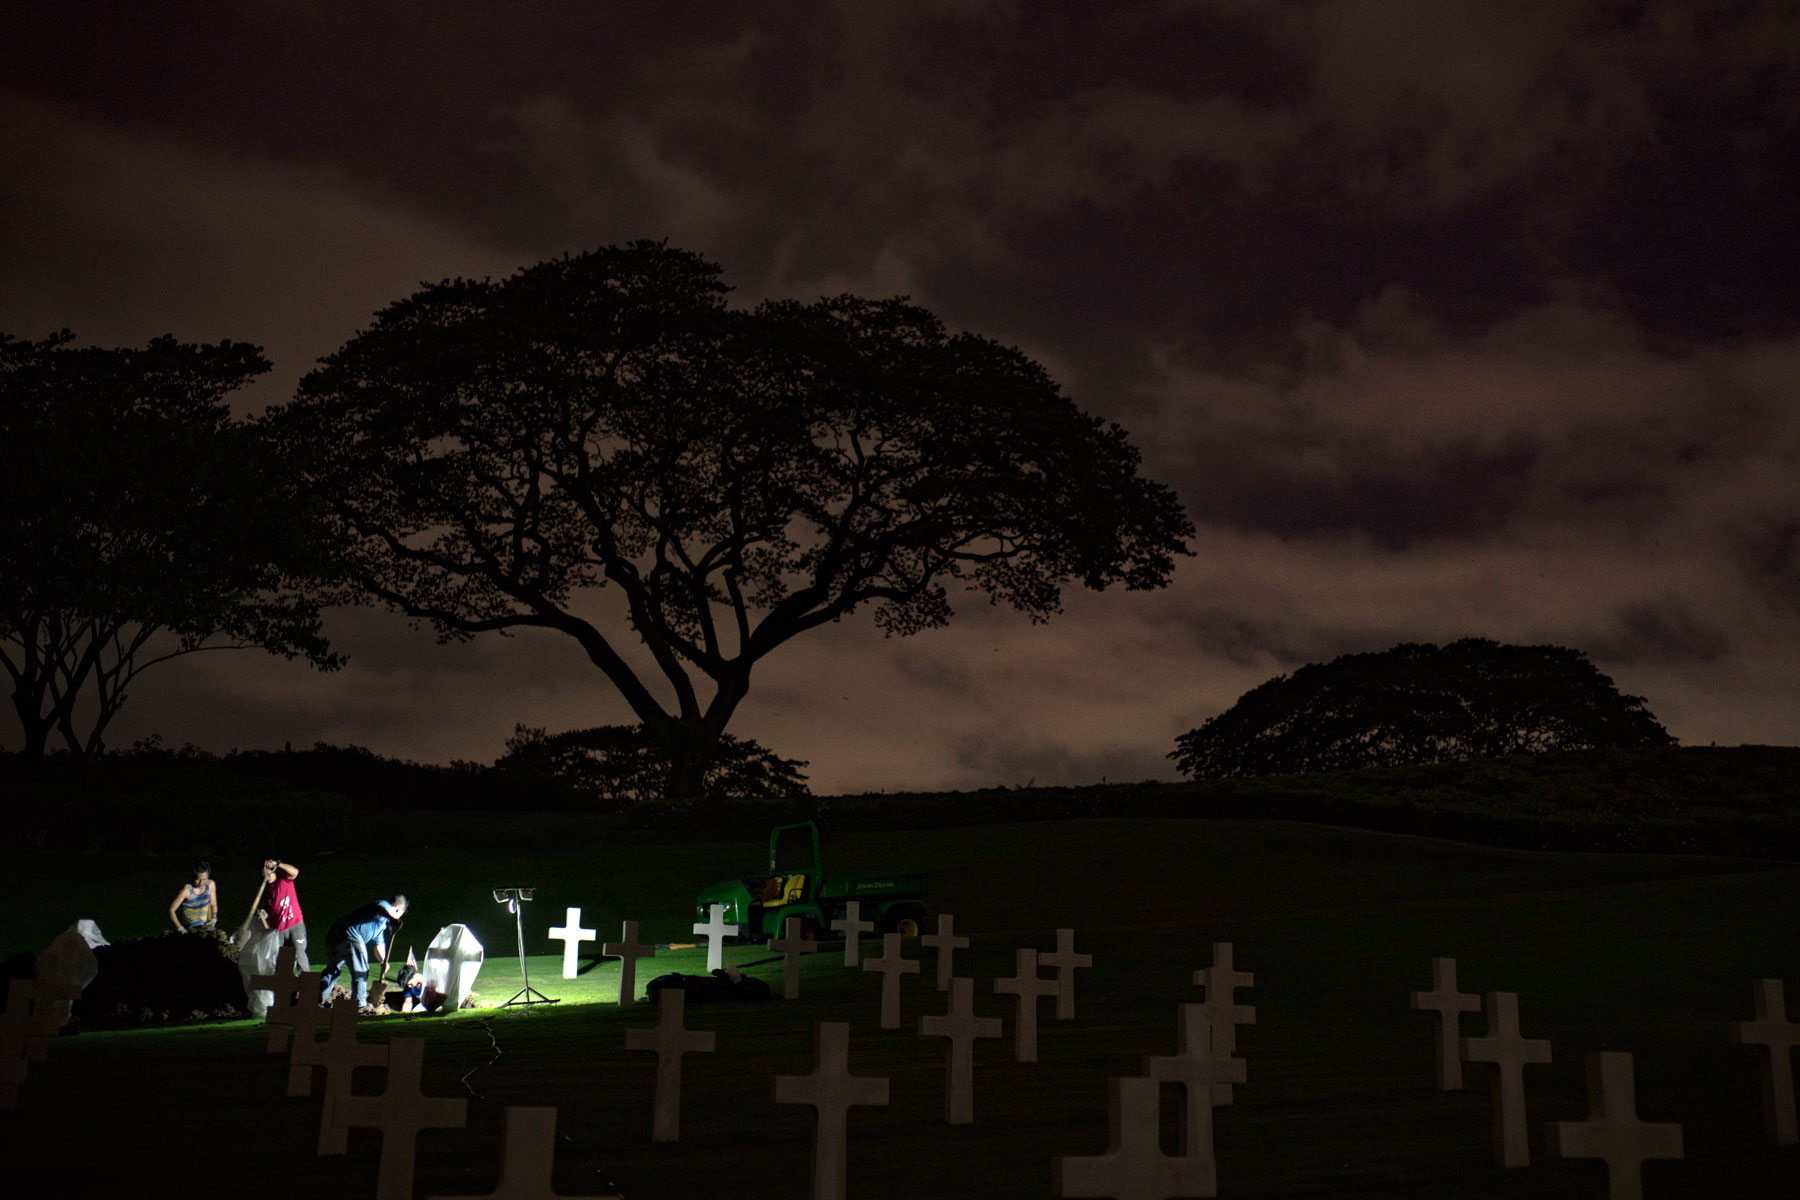 Local workers with the American Battle Monuments Commission (ABMC) uncover a casket at the Manila American Cemetery and Memorial in Manila, Philippines, June 6, 2018. ABMC worked with the Defense POW/MIA Accounting Agency (DPAA) to exhume the remains from 23 graves as part of DPAA’s effort to identify personnel that died in the Cabanatuan POW camp during WWII. (U.S. Air Force photo by Tech. Sgt. Kathrine Dodd)